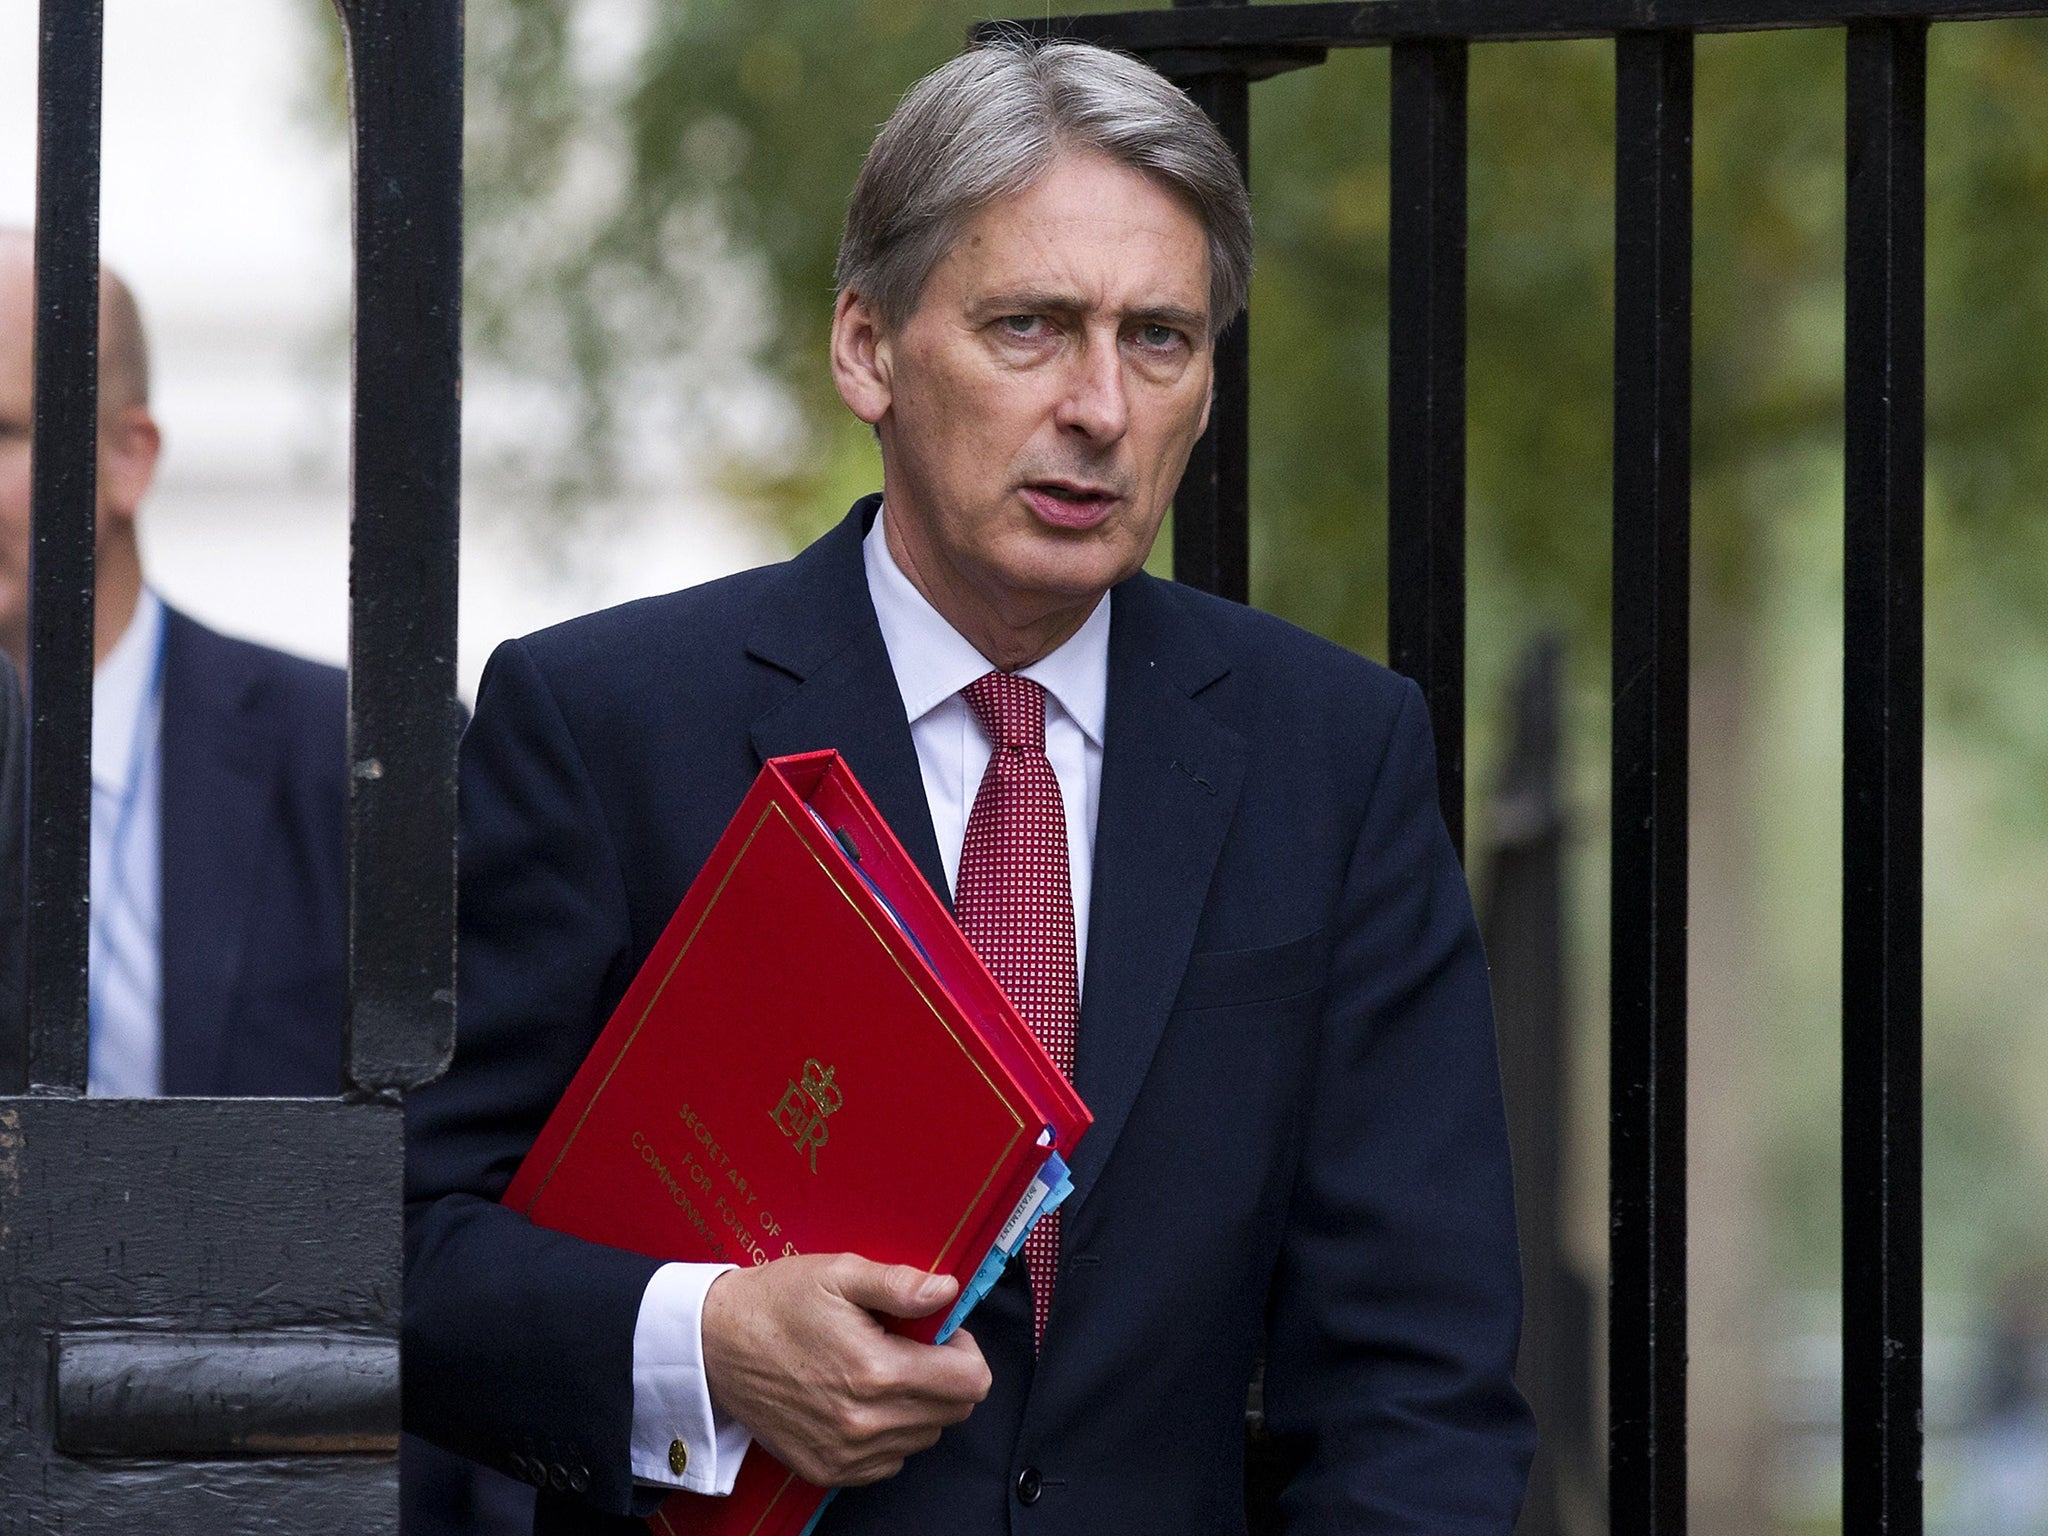 Philip Hammond said that ministers are considering the surprise move in response to hundreds of young Britons joining Isis